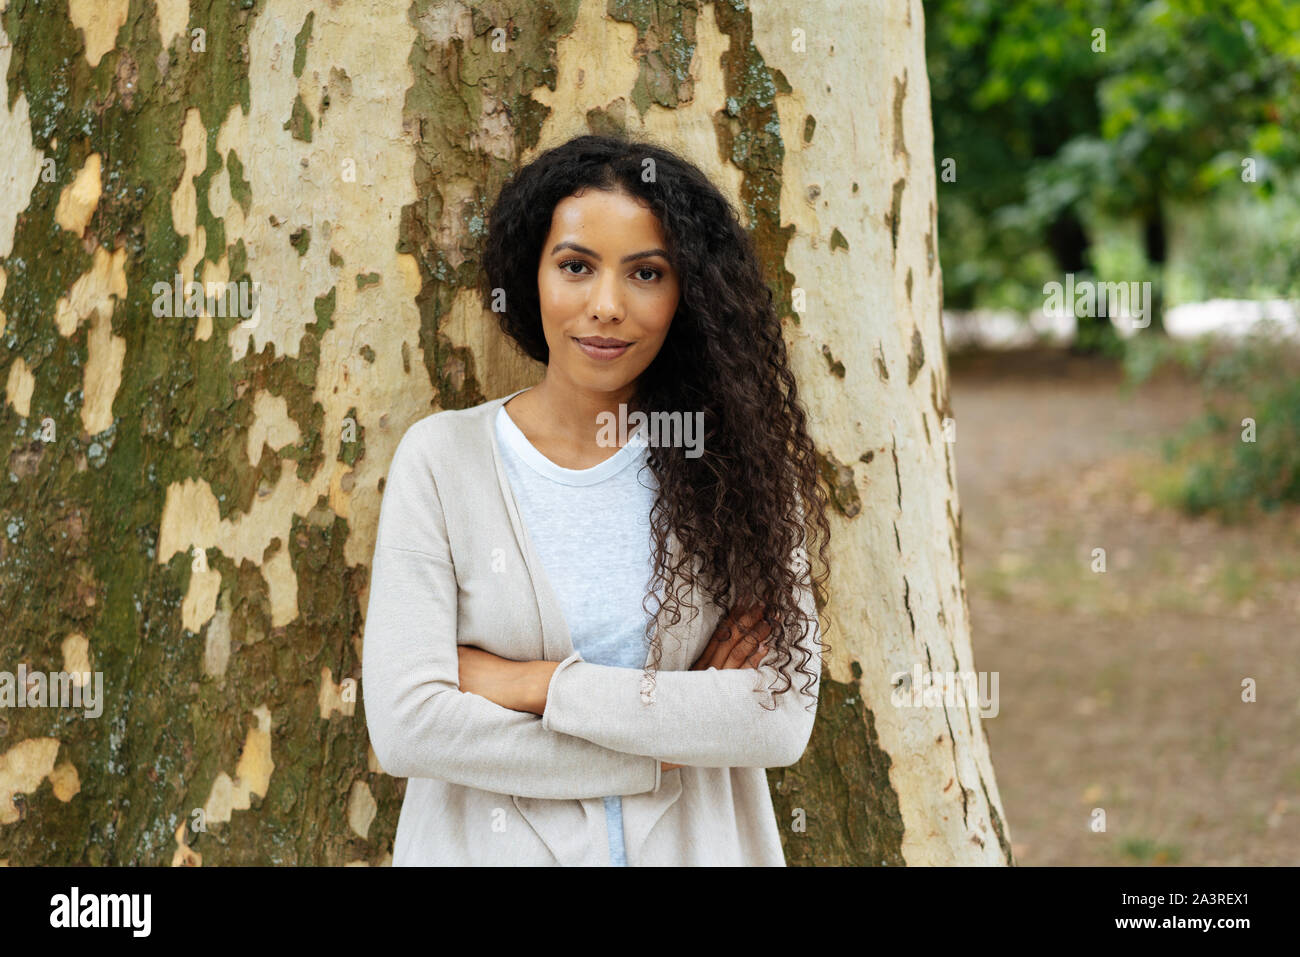 Thoughtful young woman with a quiet smile standing with folded arms against the trunk of a large tree outdoors in a park Stock Photo